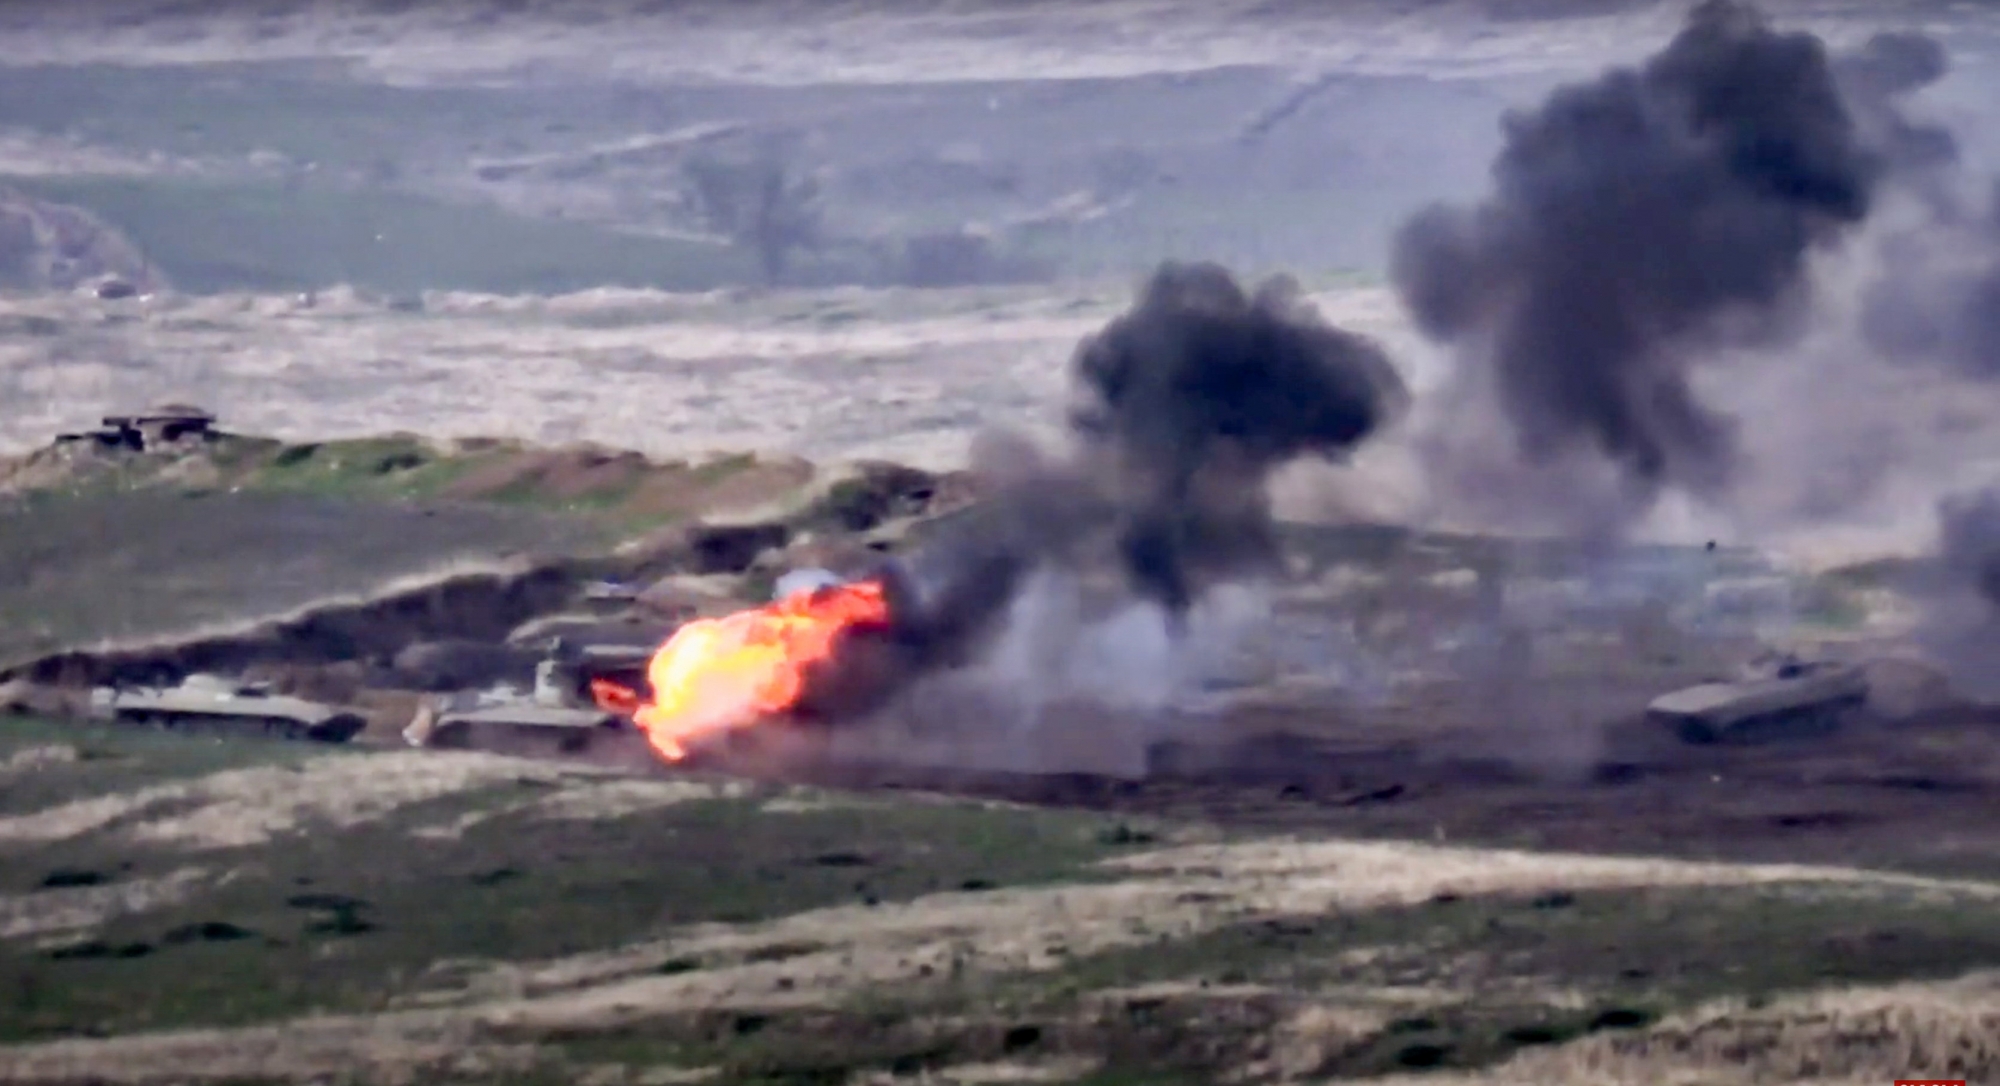 In this image taken from a footage released by Armenian Defense Ministry on Sunday, Sept. 27, 2020, Armenian forces destroy Azerbaijani military vehicle at the contact line of the self-proclaimed Republic of Nagorno-Karabakh, Azerbaijan. Fighting between Armenia and Azerbaijan has broken out around the separatist region of Nagorno-Karabakh and the Armenian Defense Ministry says two Azerbaijani helicopters have been shot down. Ministry spokeswoman Shushan Stepanyan also said Armenian forces hit three Azerbaijani tanks. (Armenian Defense Ministry via AP) ArcInfo